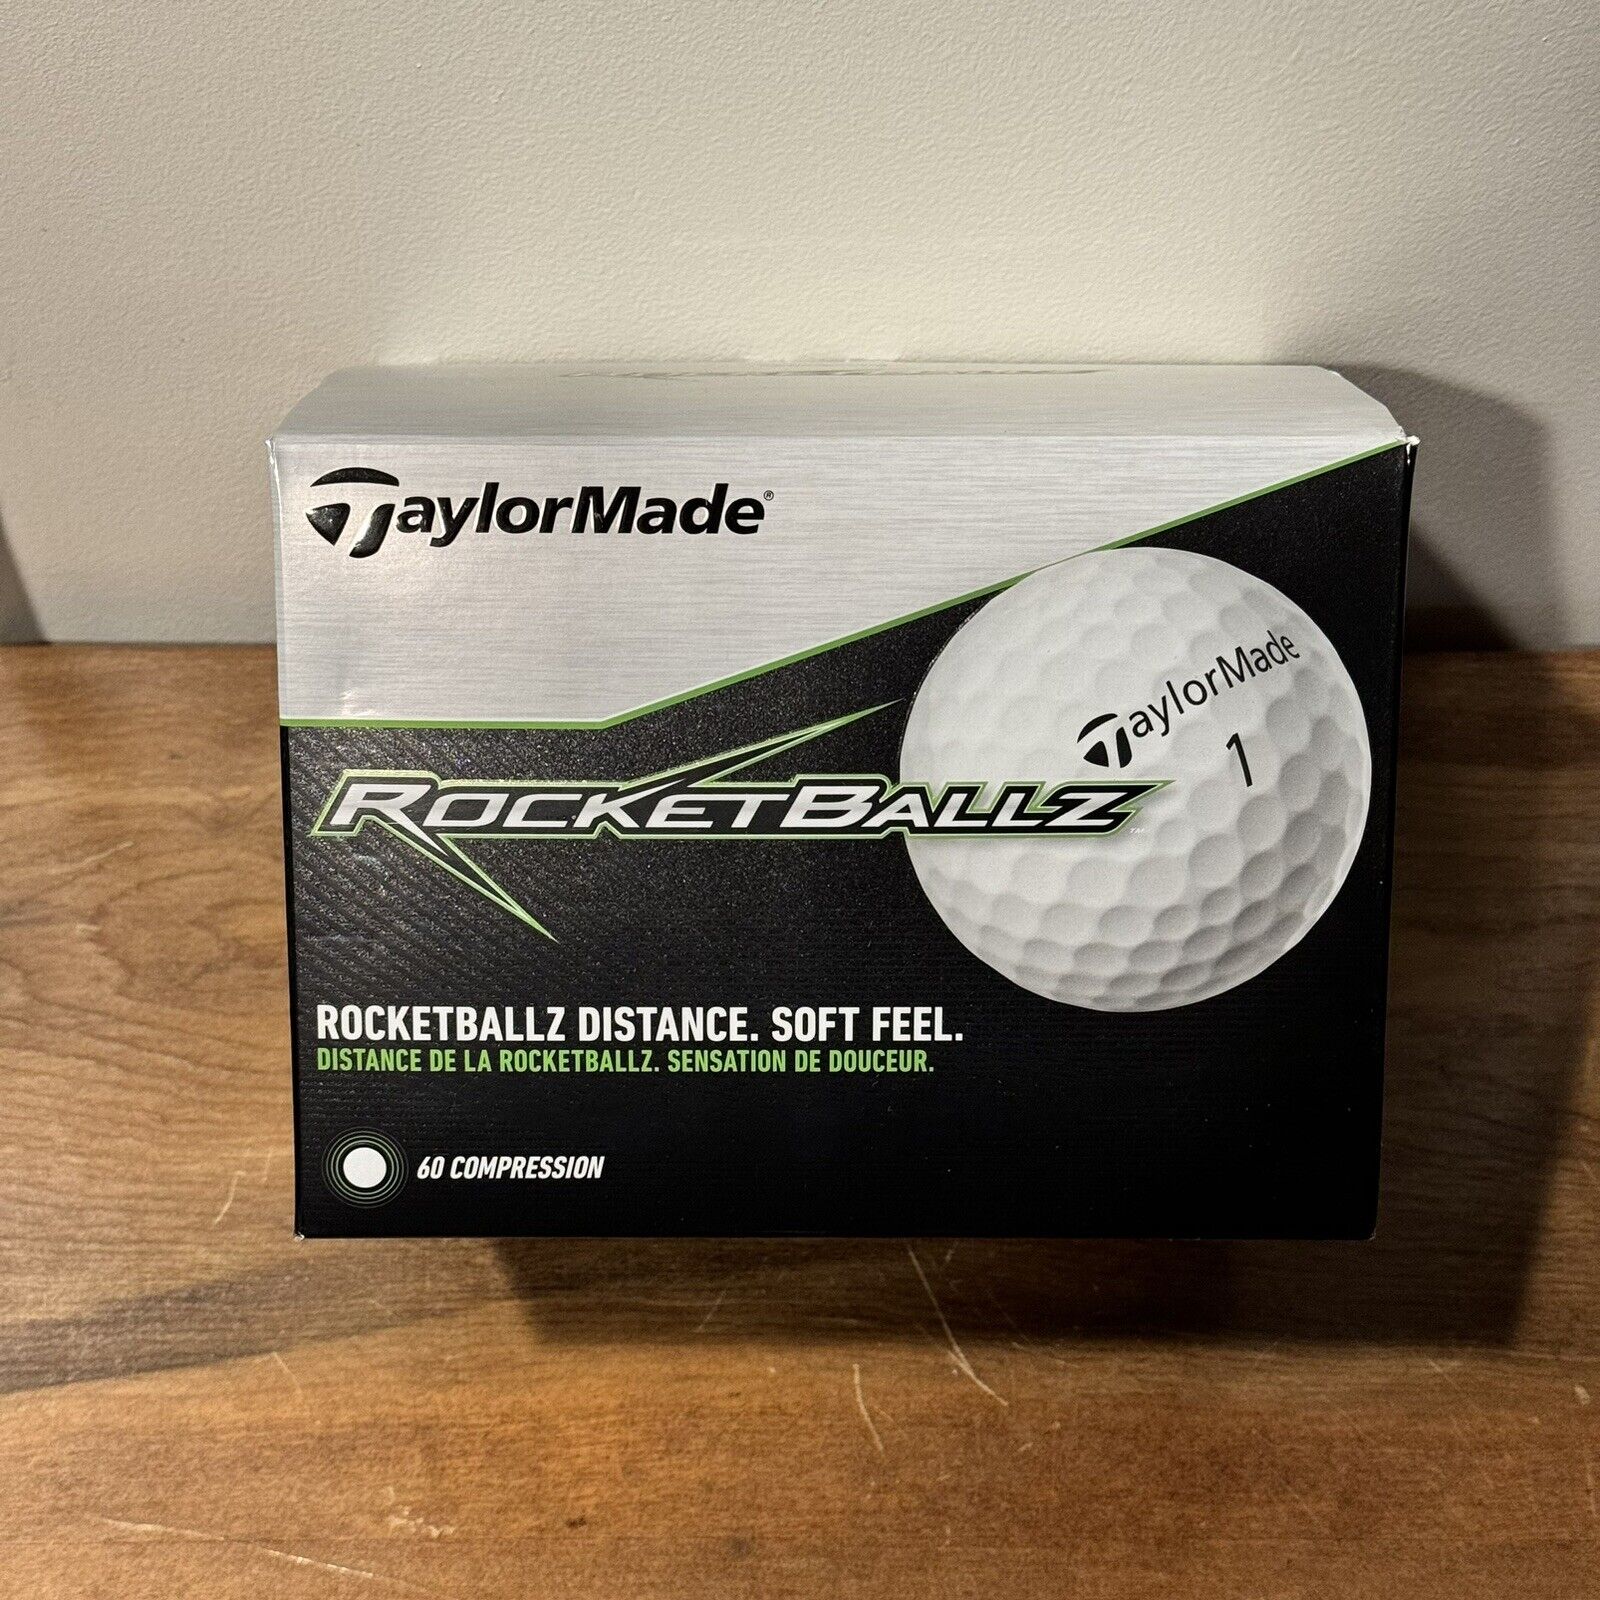 TaylorMade Rocketballz 36 Pack Golf Ball, White 60 Compression Soft Feel